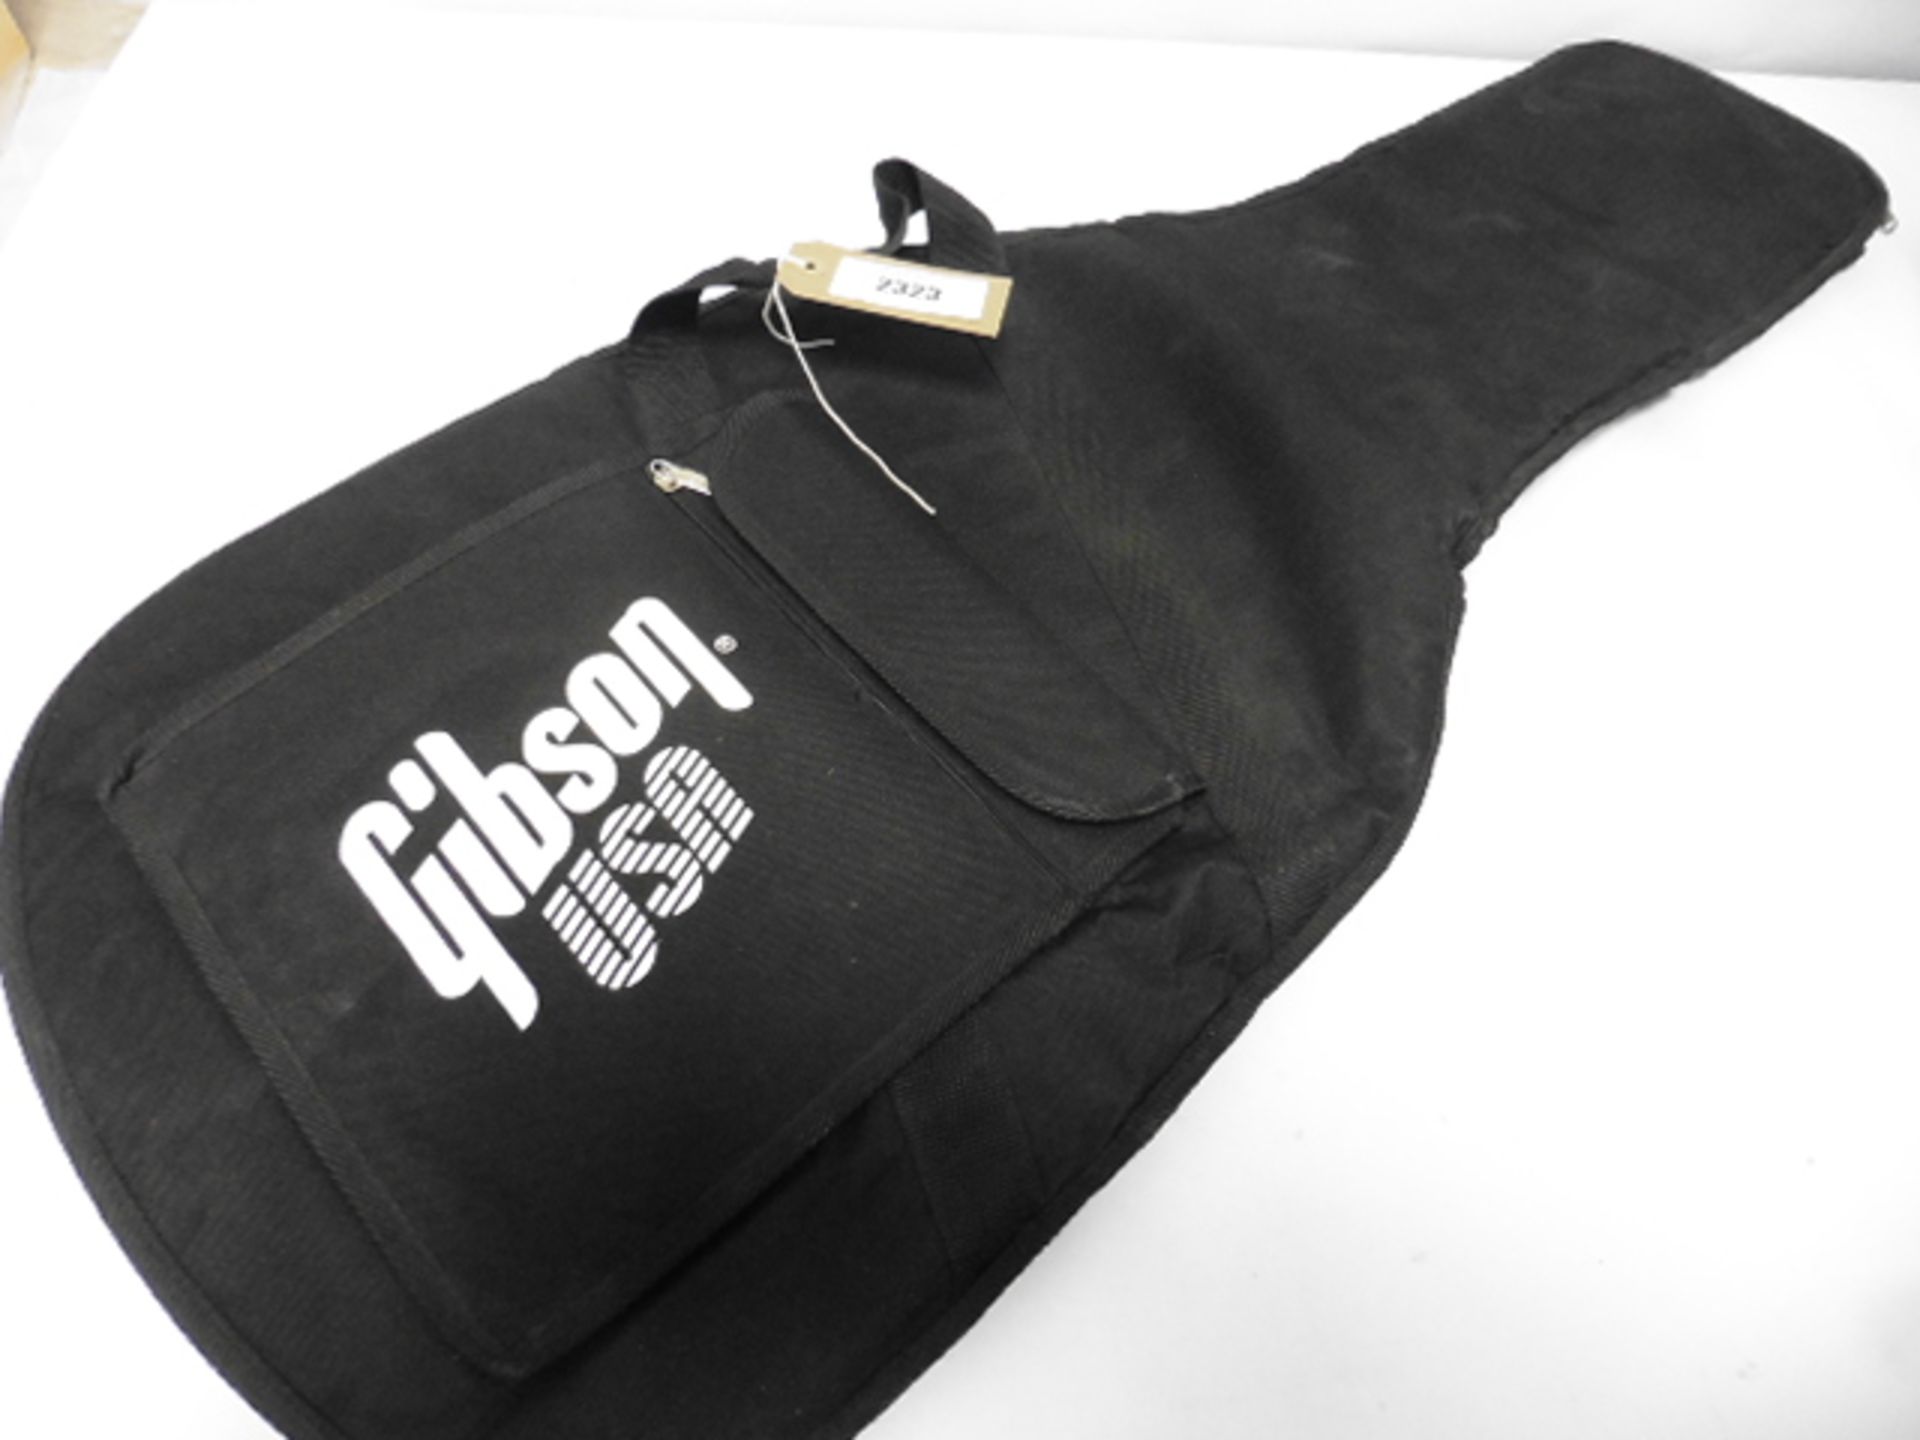 Gibson USA guitar soft case in black